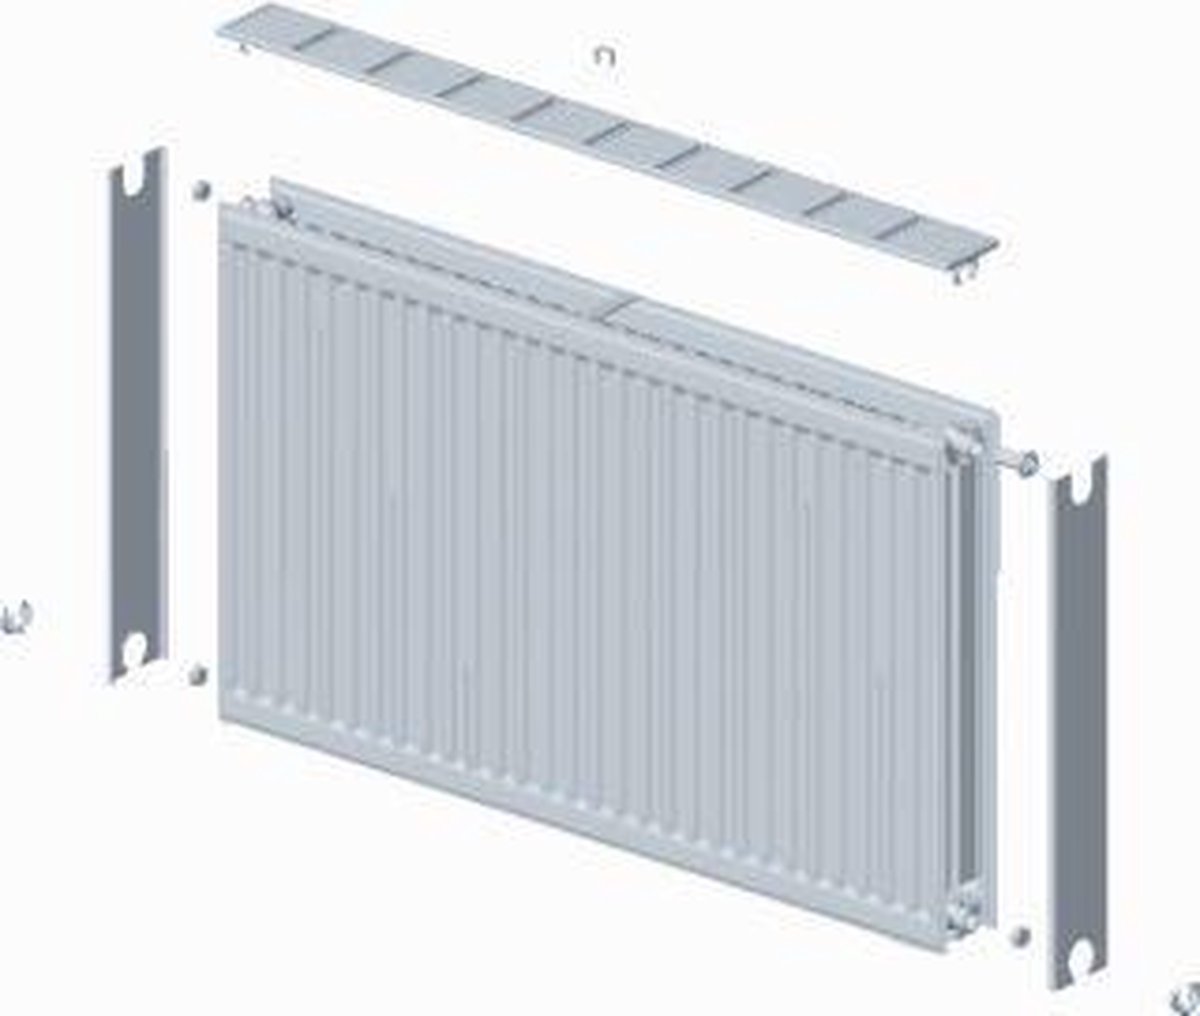 Stelrad paneelradiator Novello, staal, wit, (hxlxd) 900x400x100mm, 22